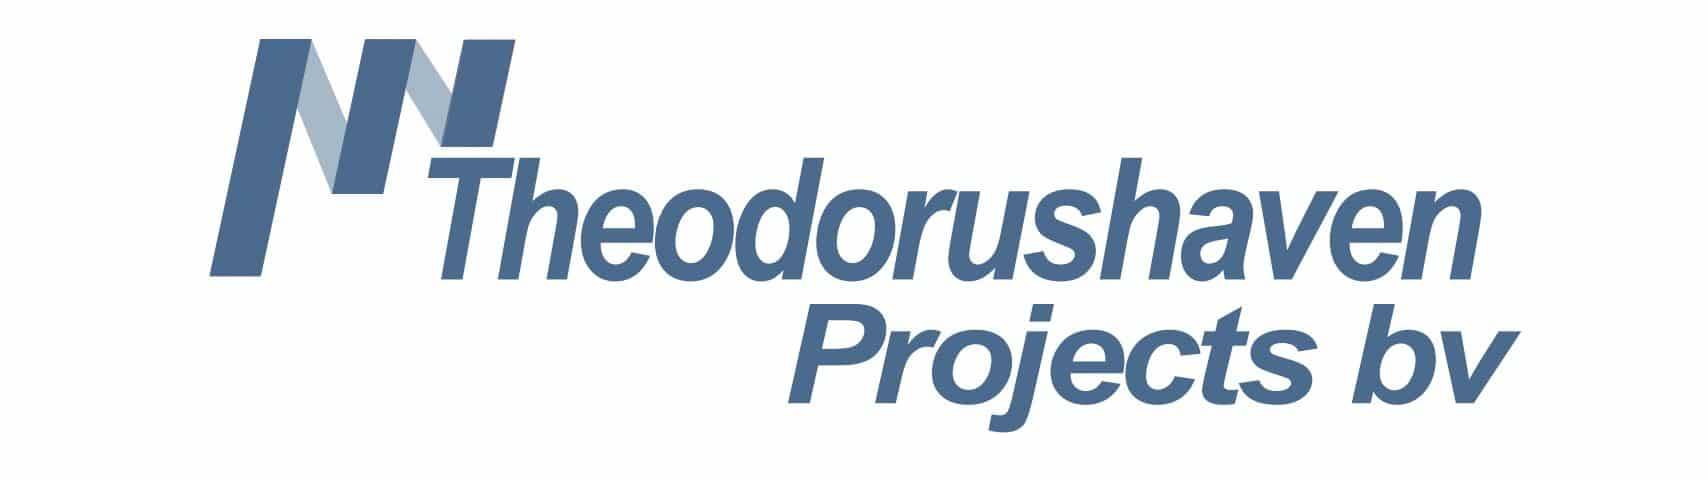 Theodorushaven Projects BV